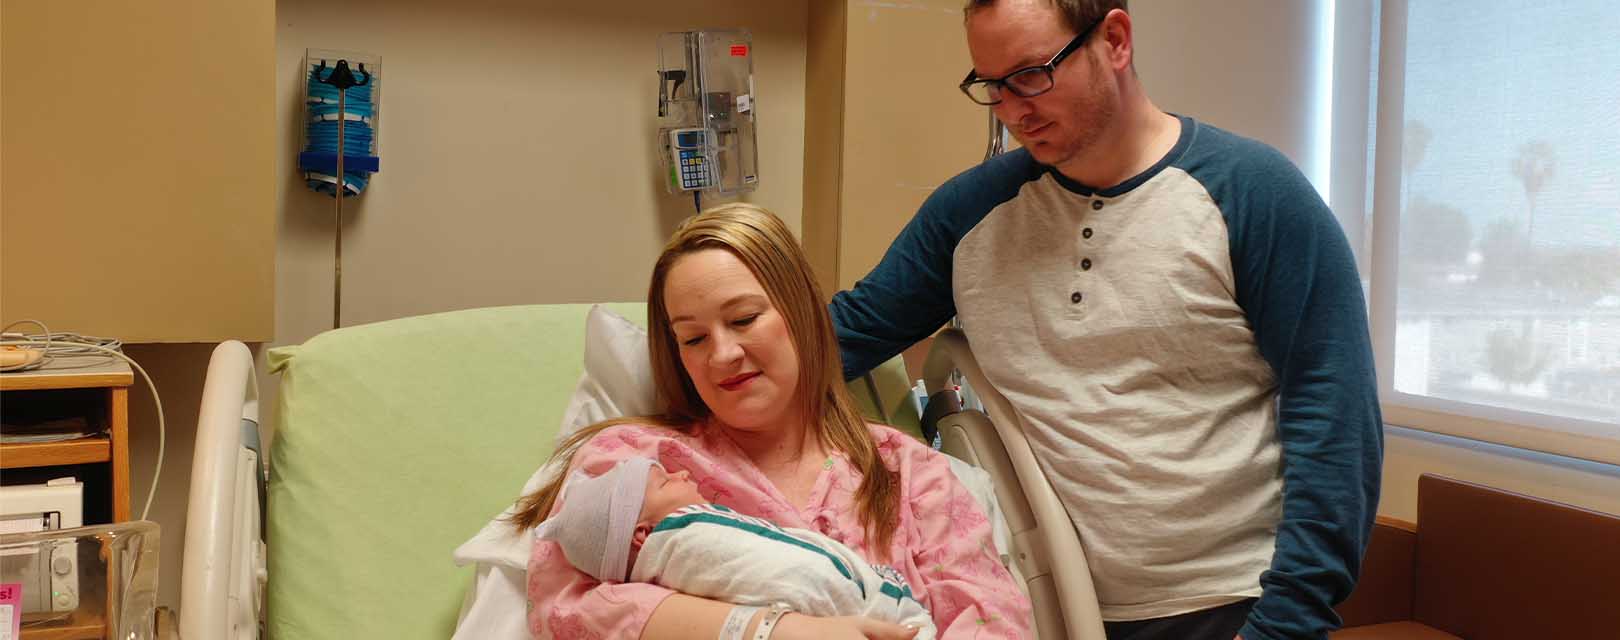 Photo of new mom and dad with baby in their hospital room.